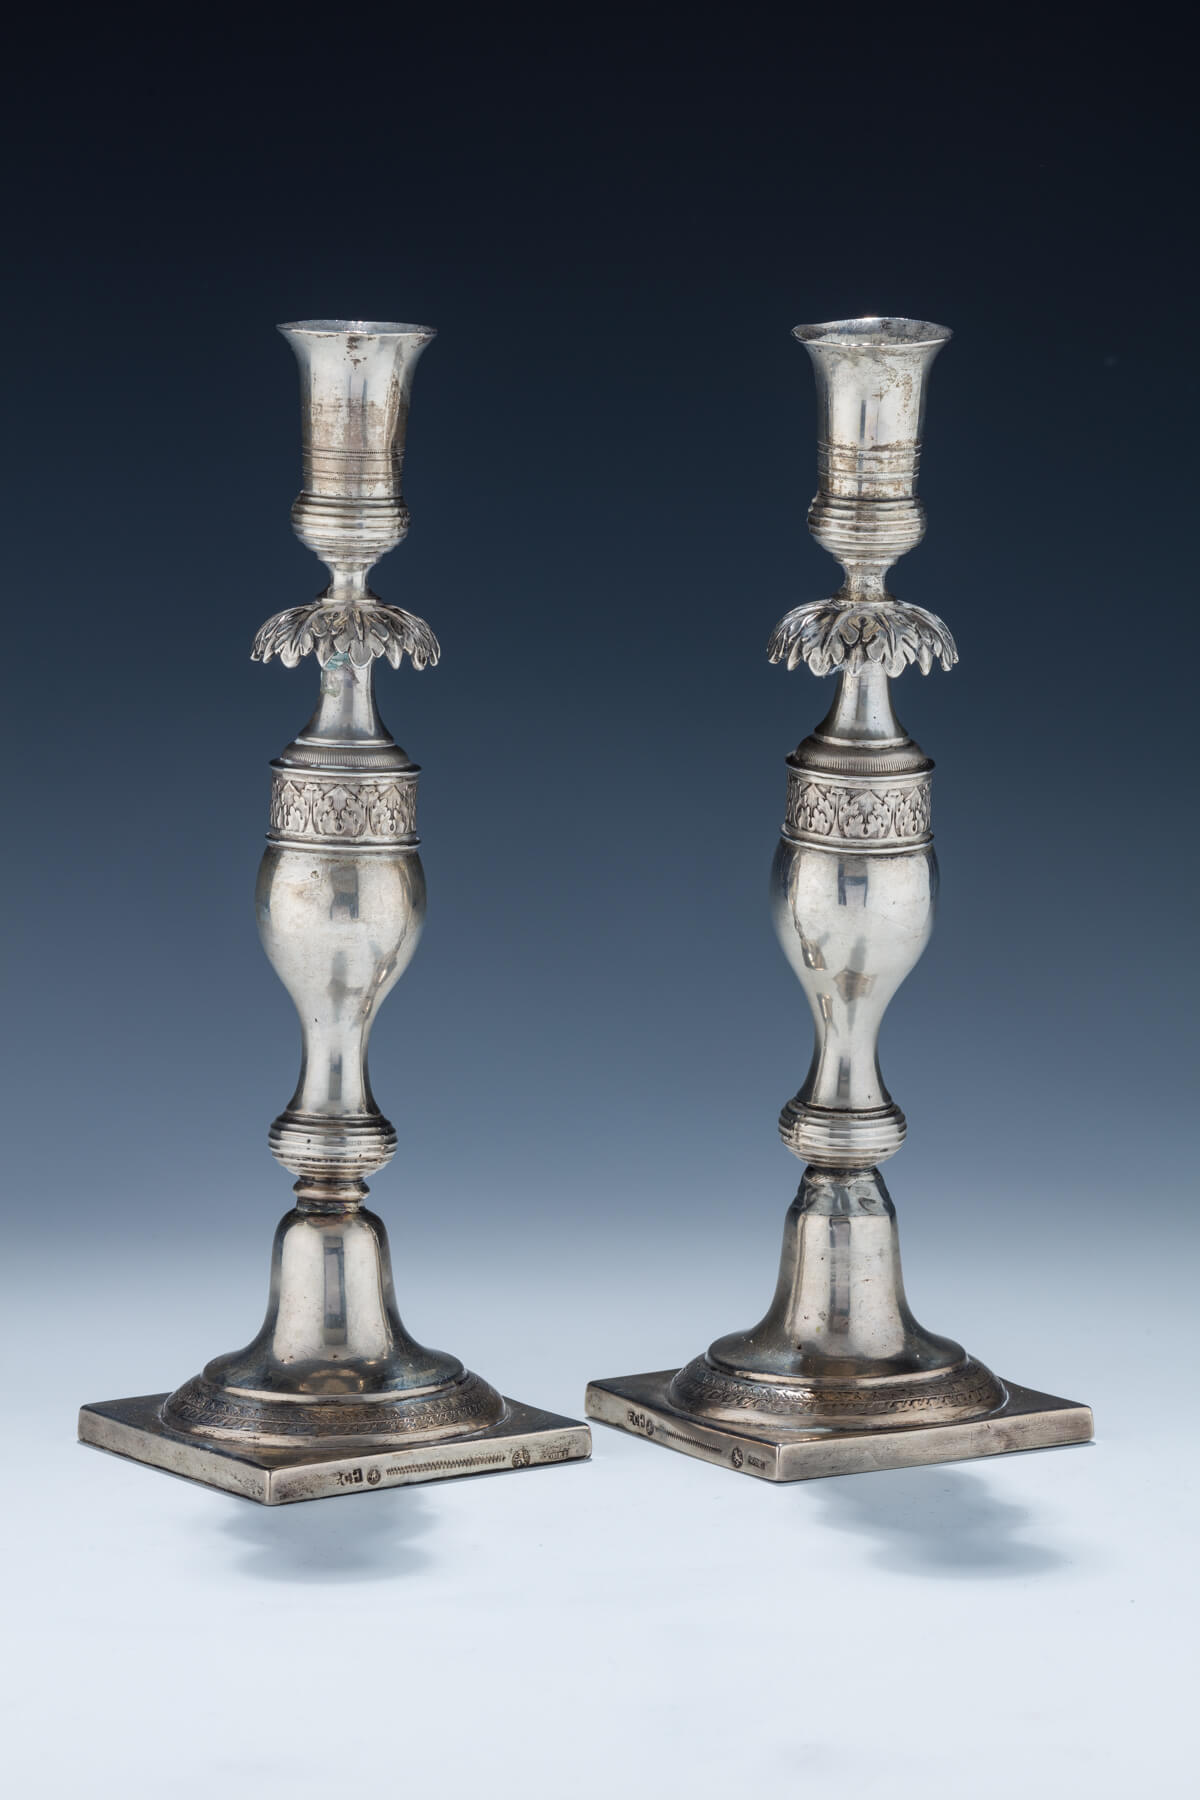 34. A Pair of Silver Candlesticks